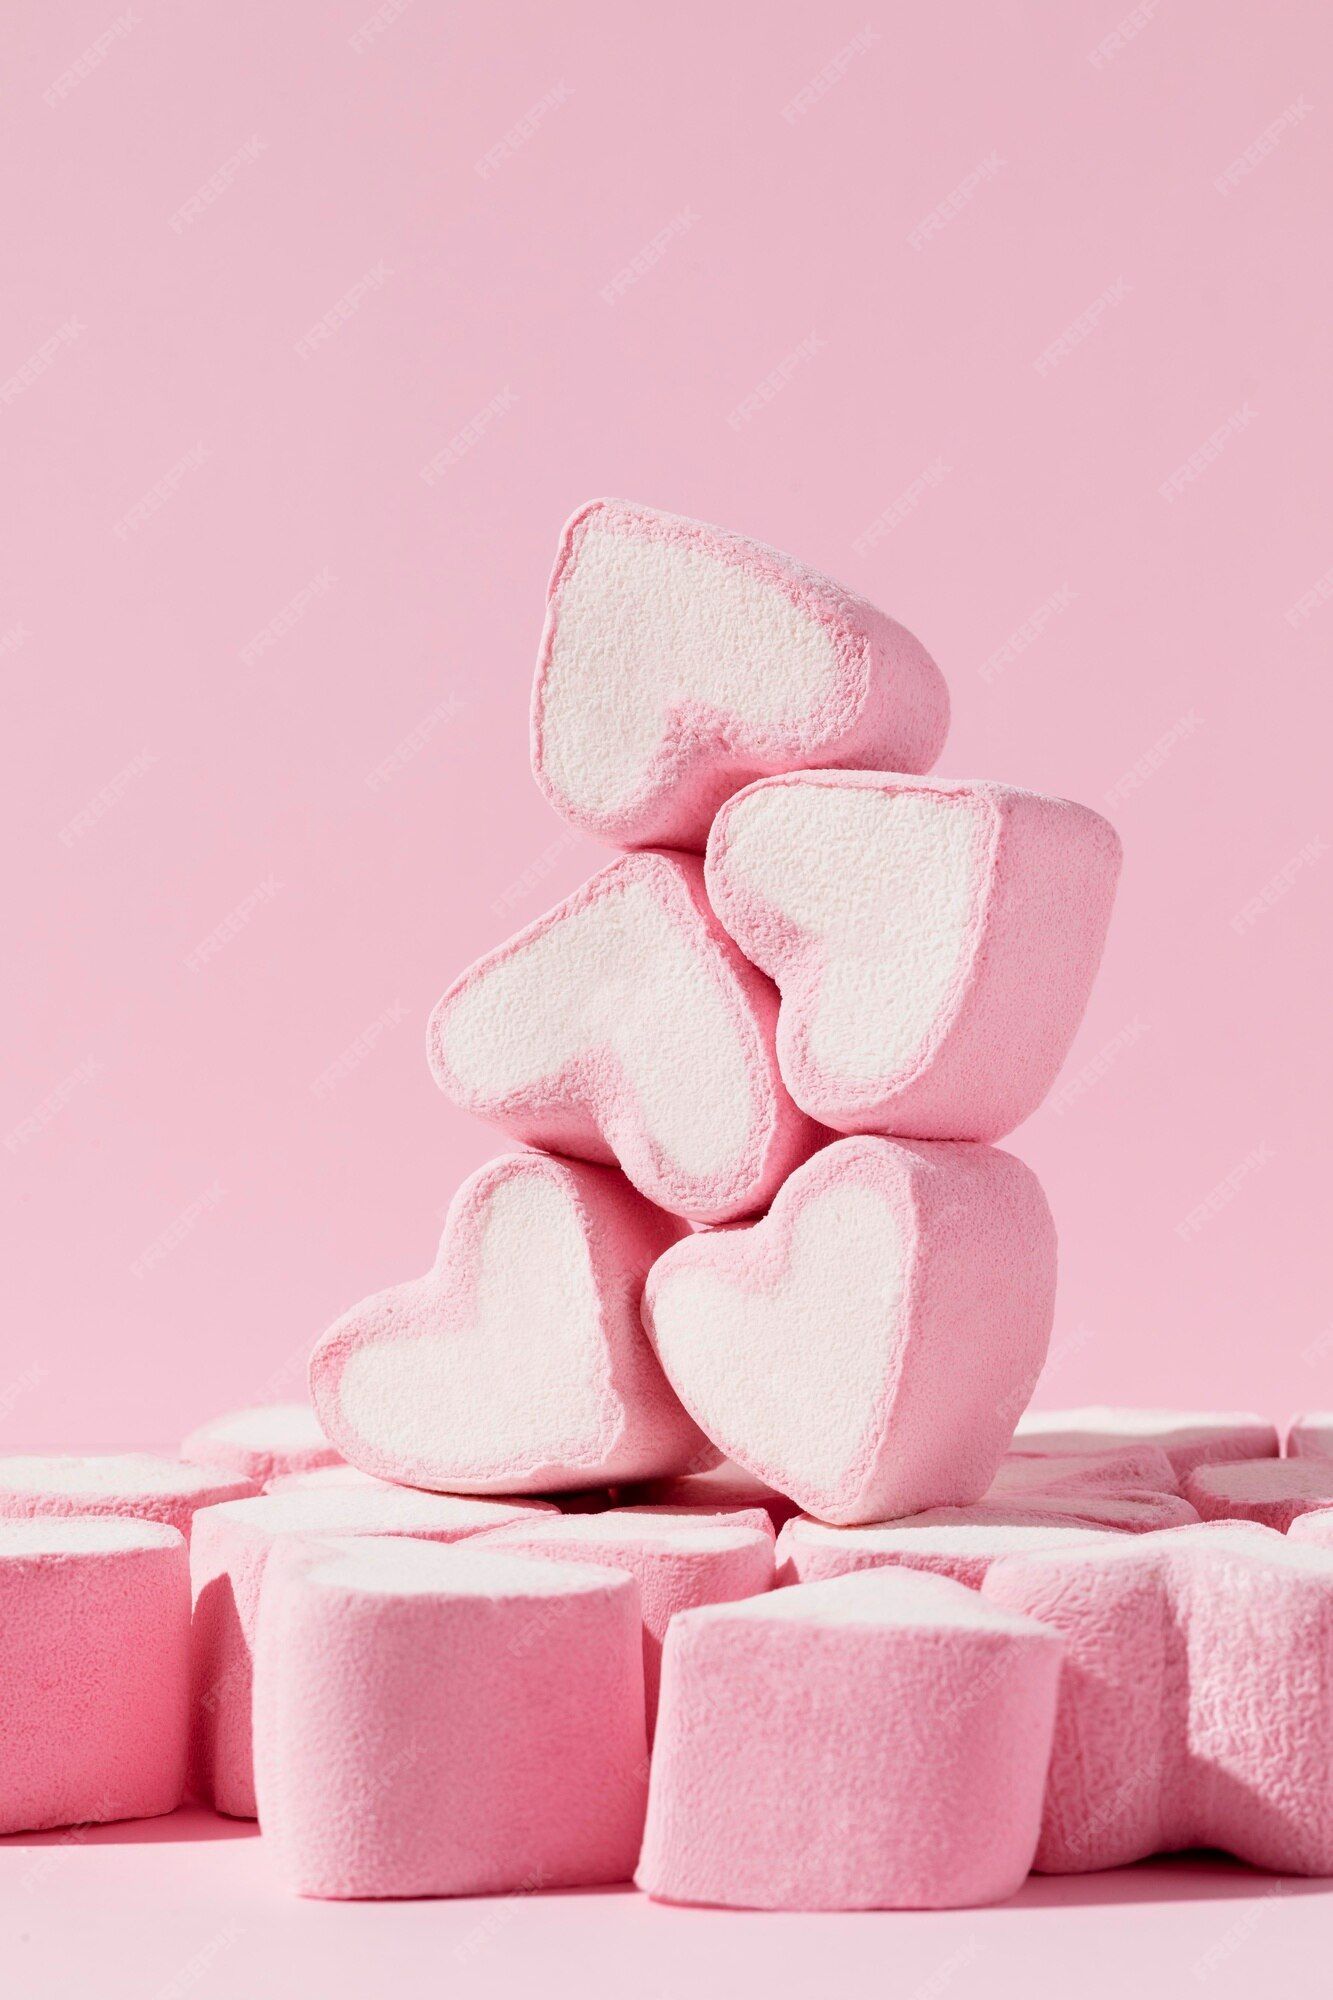 A pile of pink heart shaped marshmallows - Marshmallows